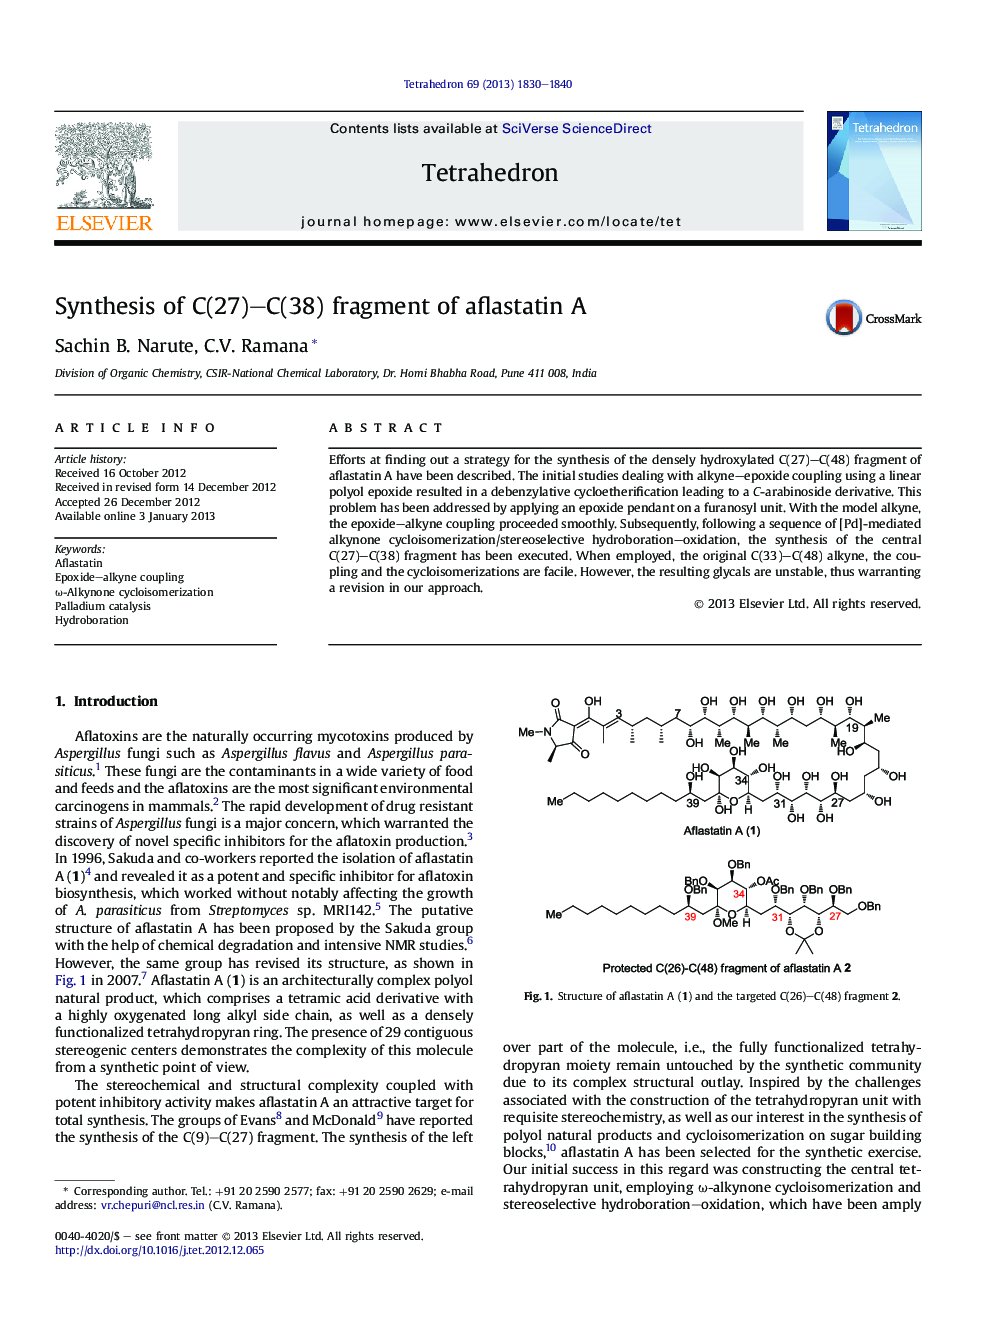 Synthesis of C(27)-C(38) fragment of aflastatin A